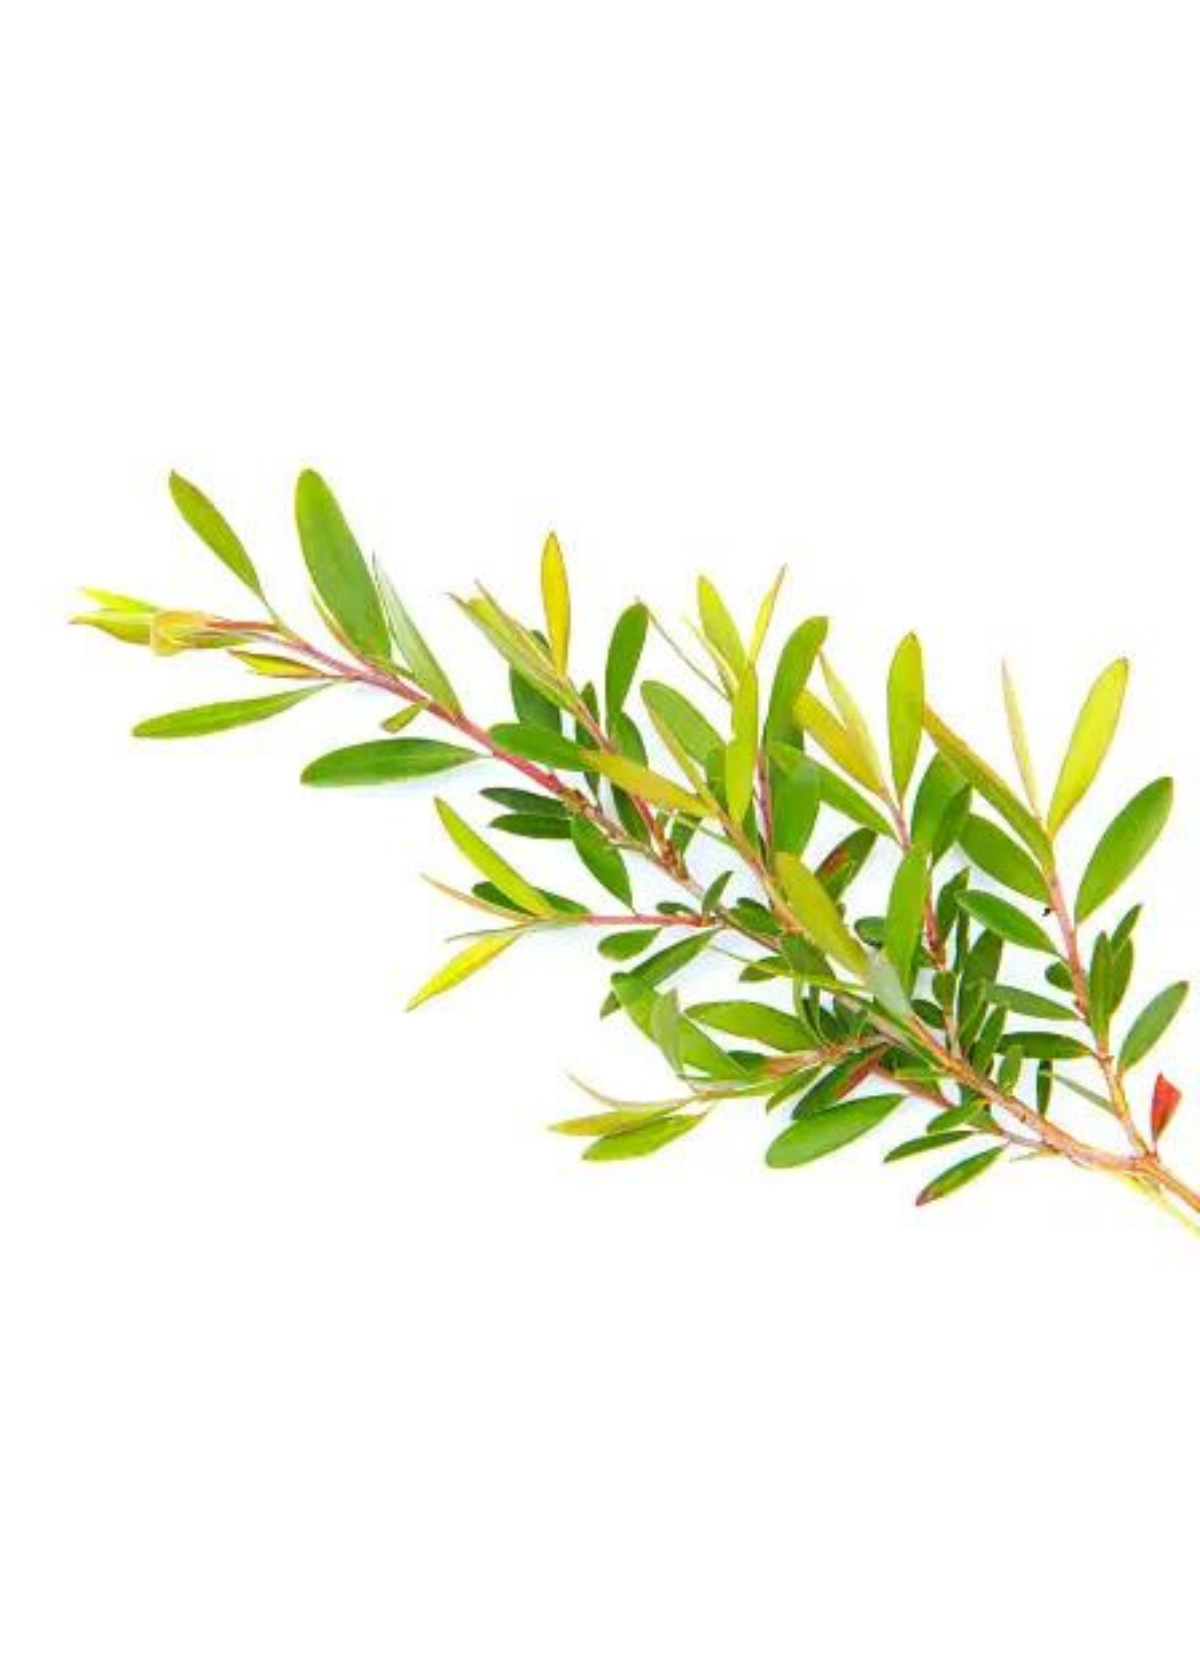 Discover the Best Tea Tree Oil Products with Our Top Choices!